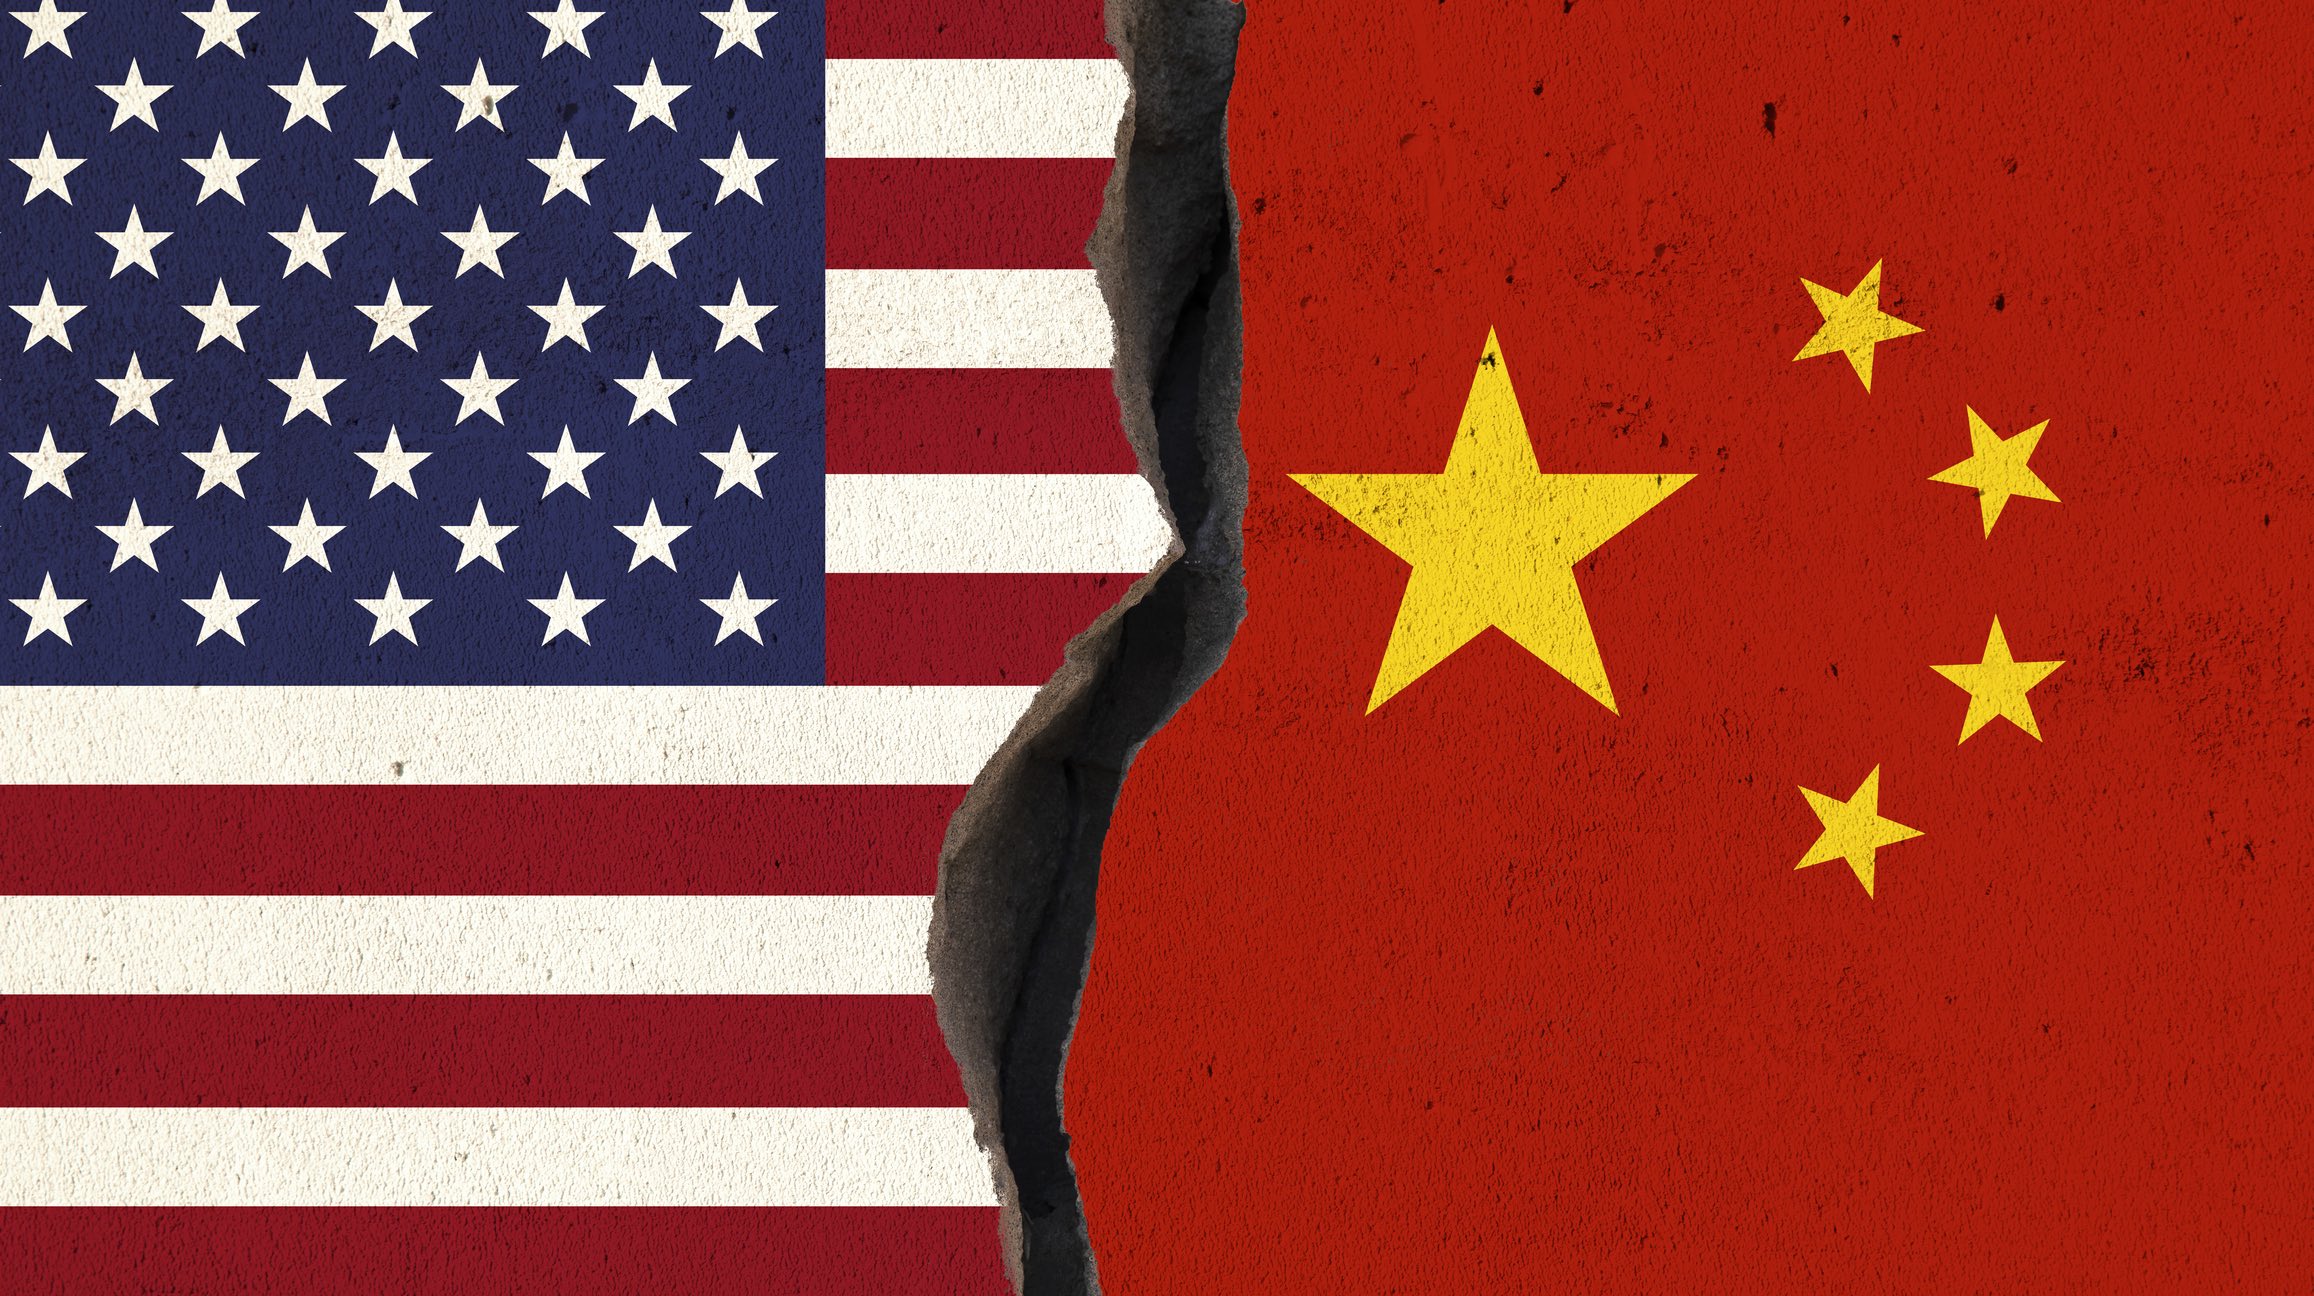 Illustration of the US and Chinese flags next to each other on a wall with a crack separating the two flags.